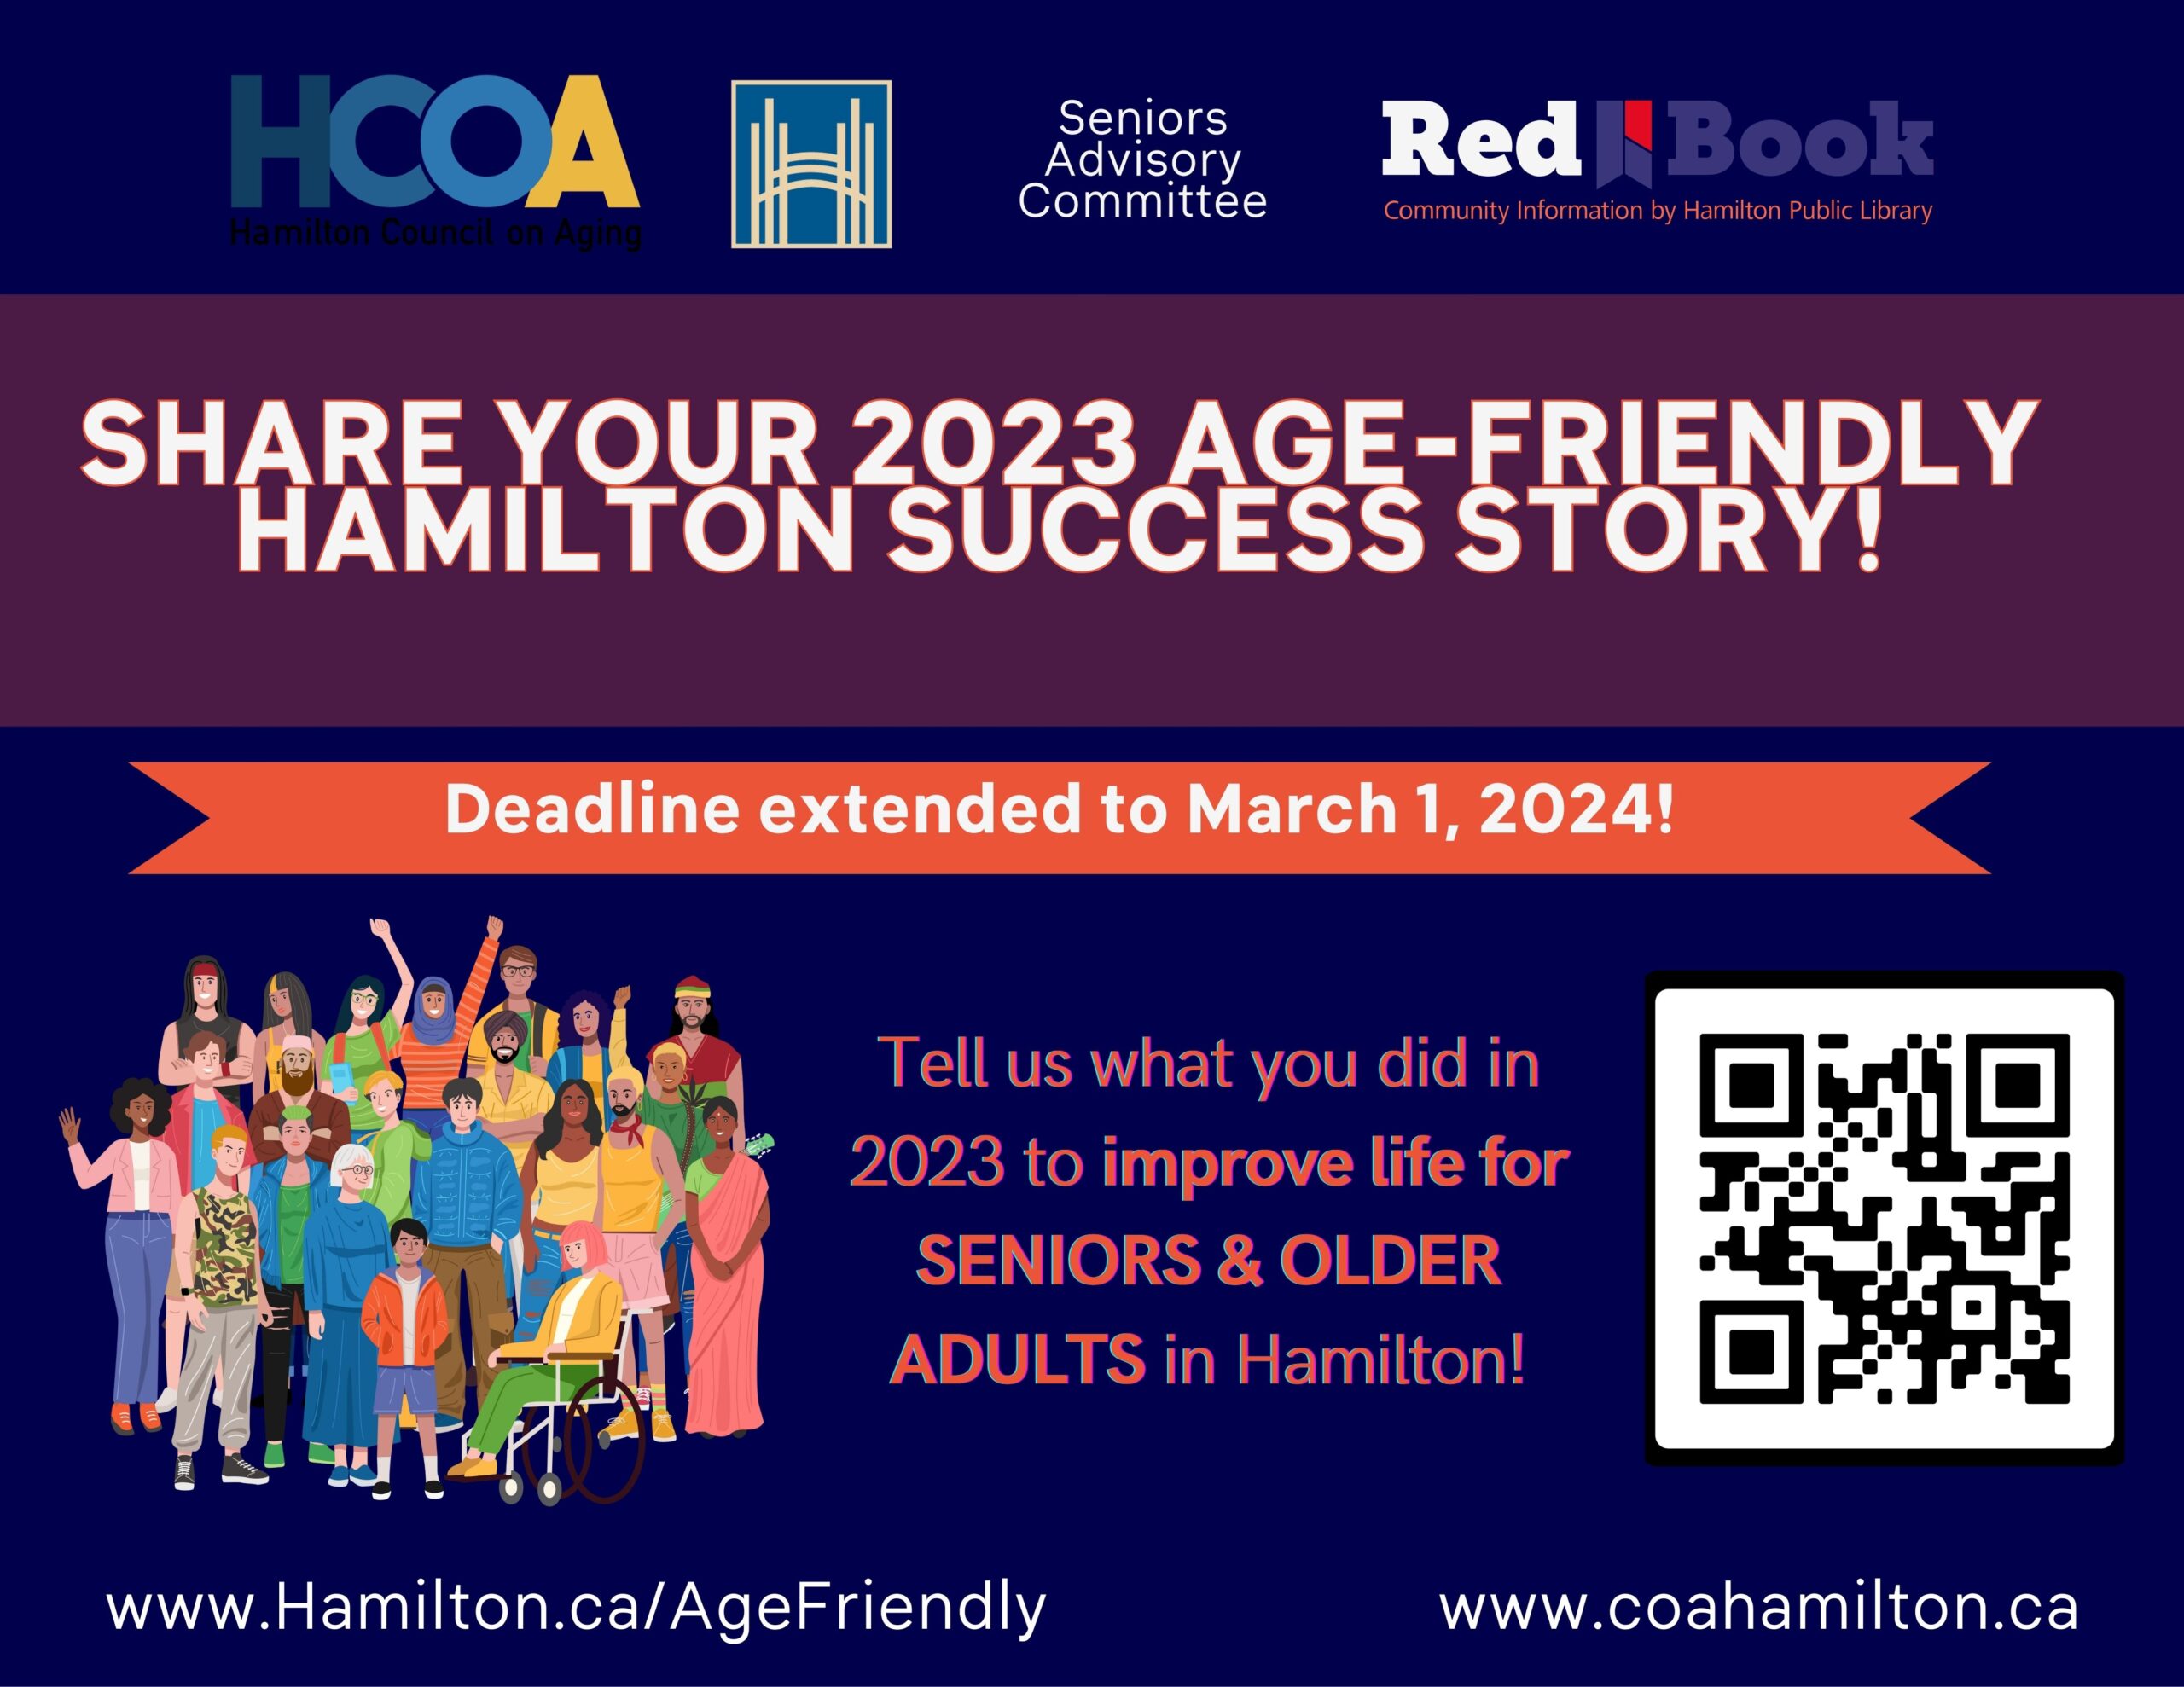 Share your Age-Friendly Hamilton Success Story!